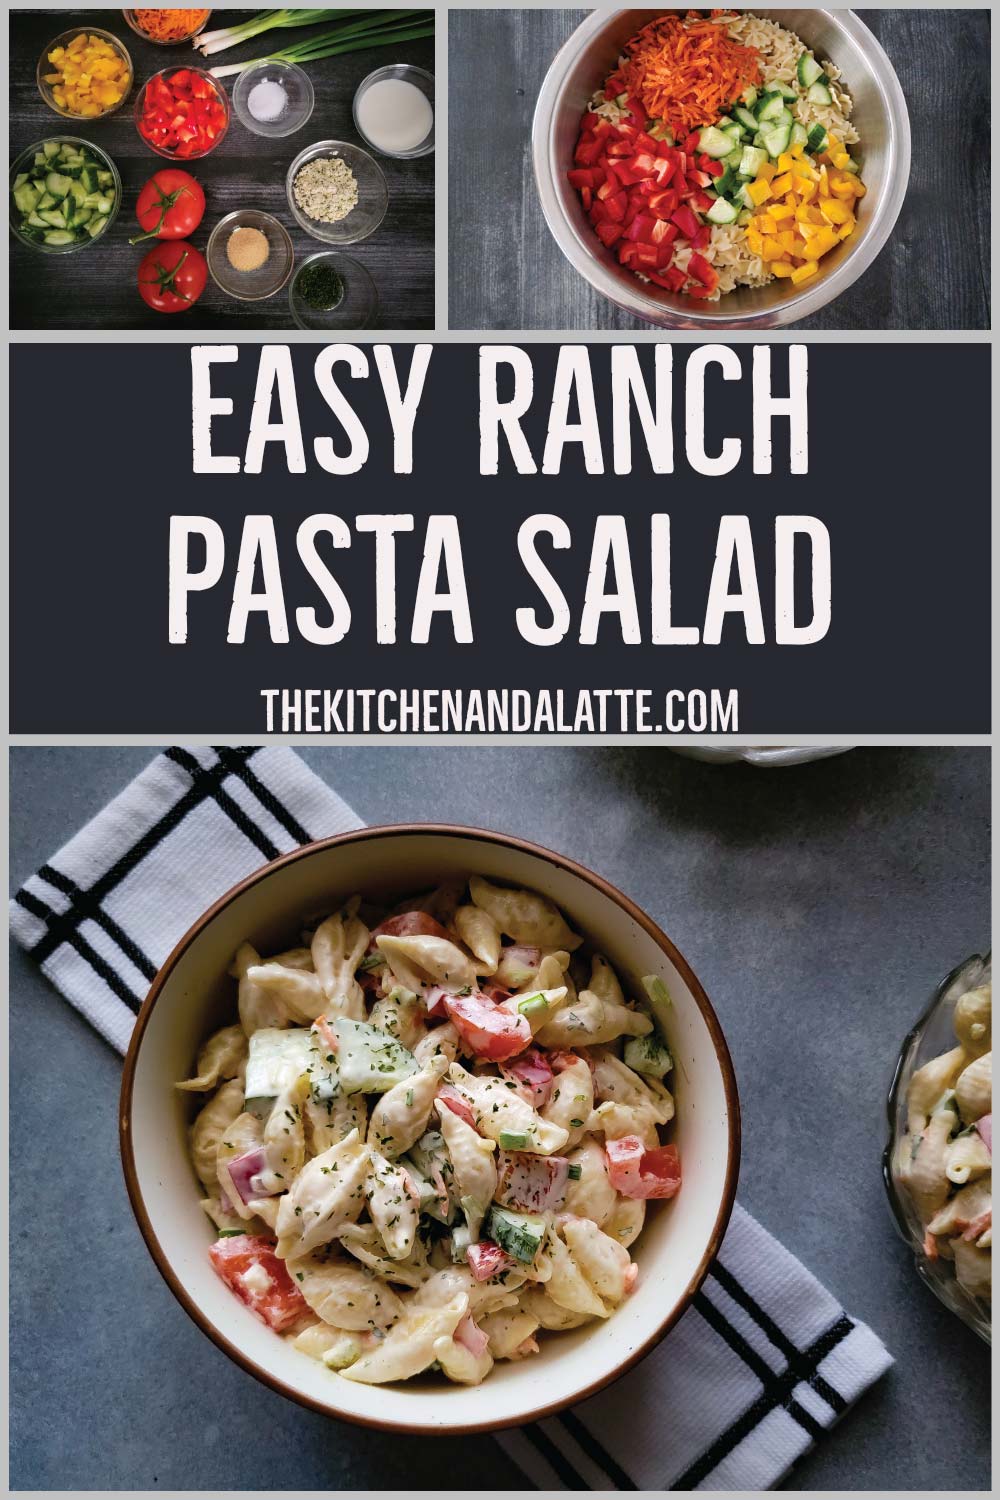 Easy ranch pasta salad Pinterest graphic. 3 images - 1 is pasta salad in serving bowls ready to eat, 1 is ingredients prepped and the other is noodles in a mixing bowl with shredded carrot, chopped peppers and cucumbers on top before mixing in.